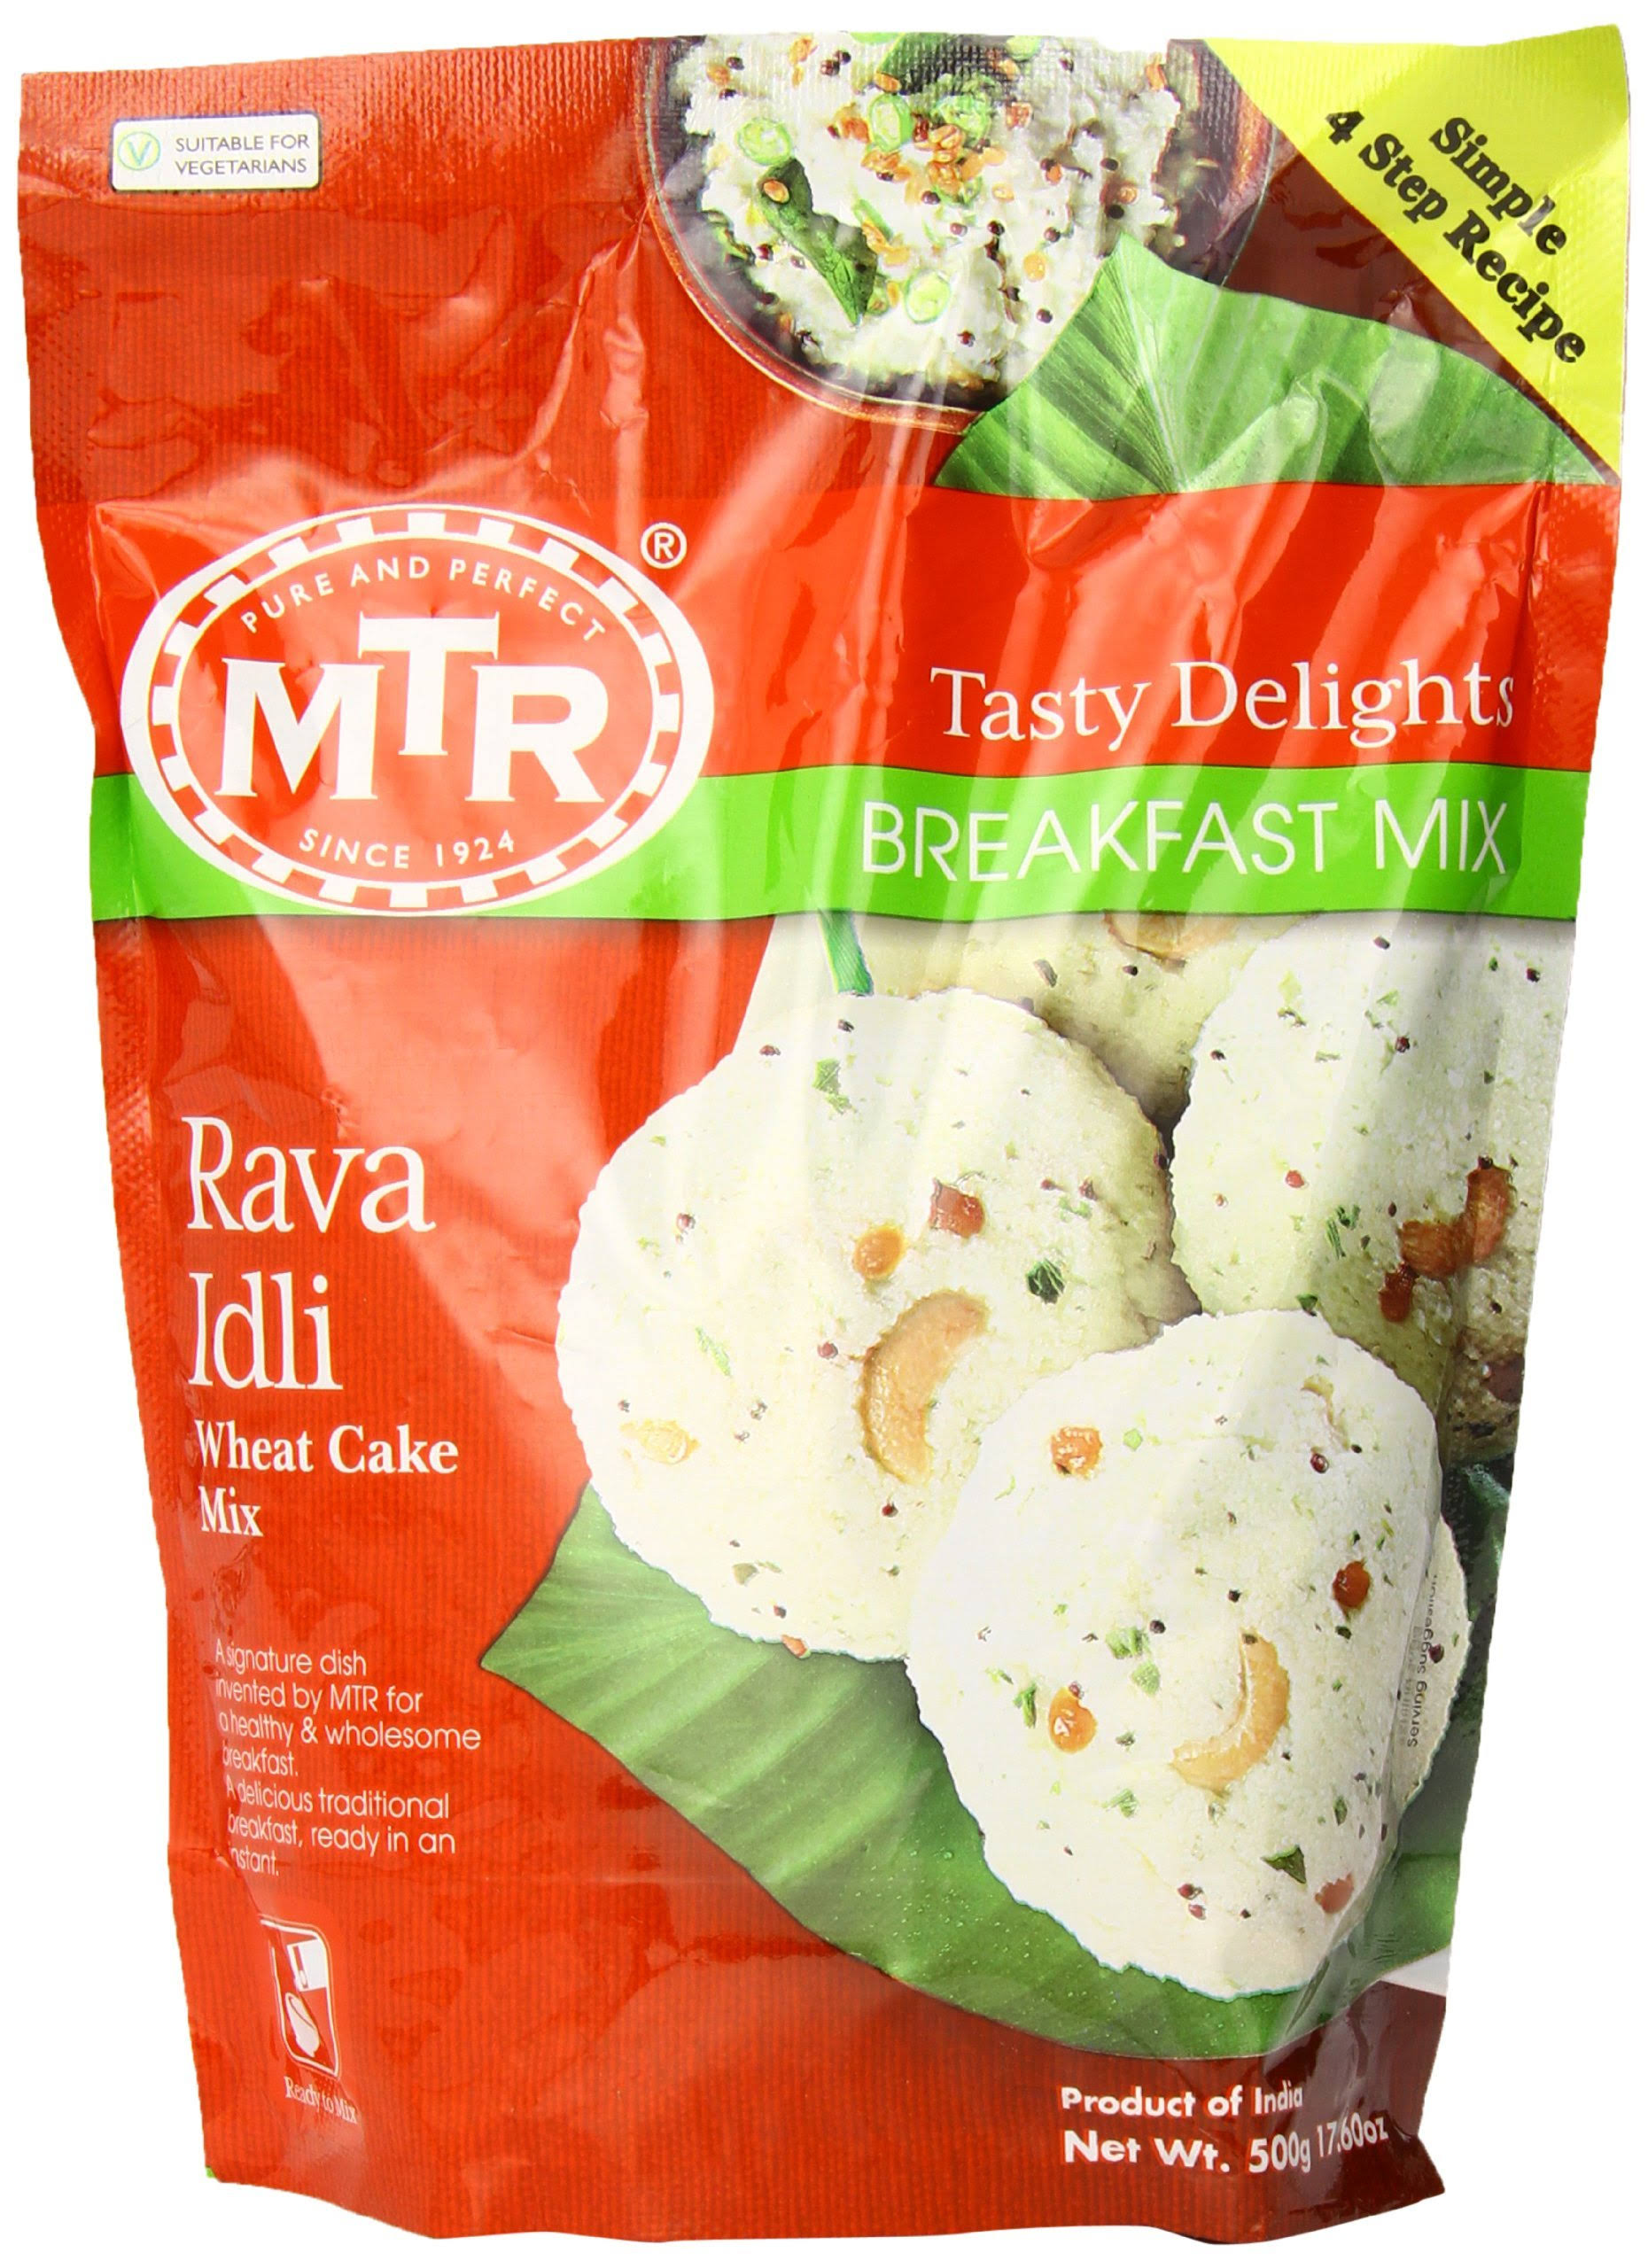 Mtr Rava Idli Instant Dry Mix, 17.6-Ounce Pouches (Pack of 24)